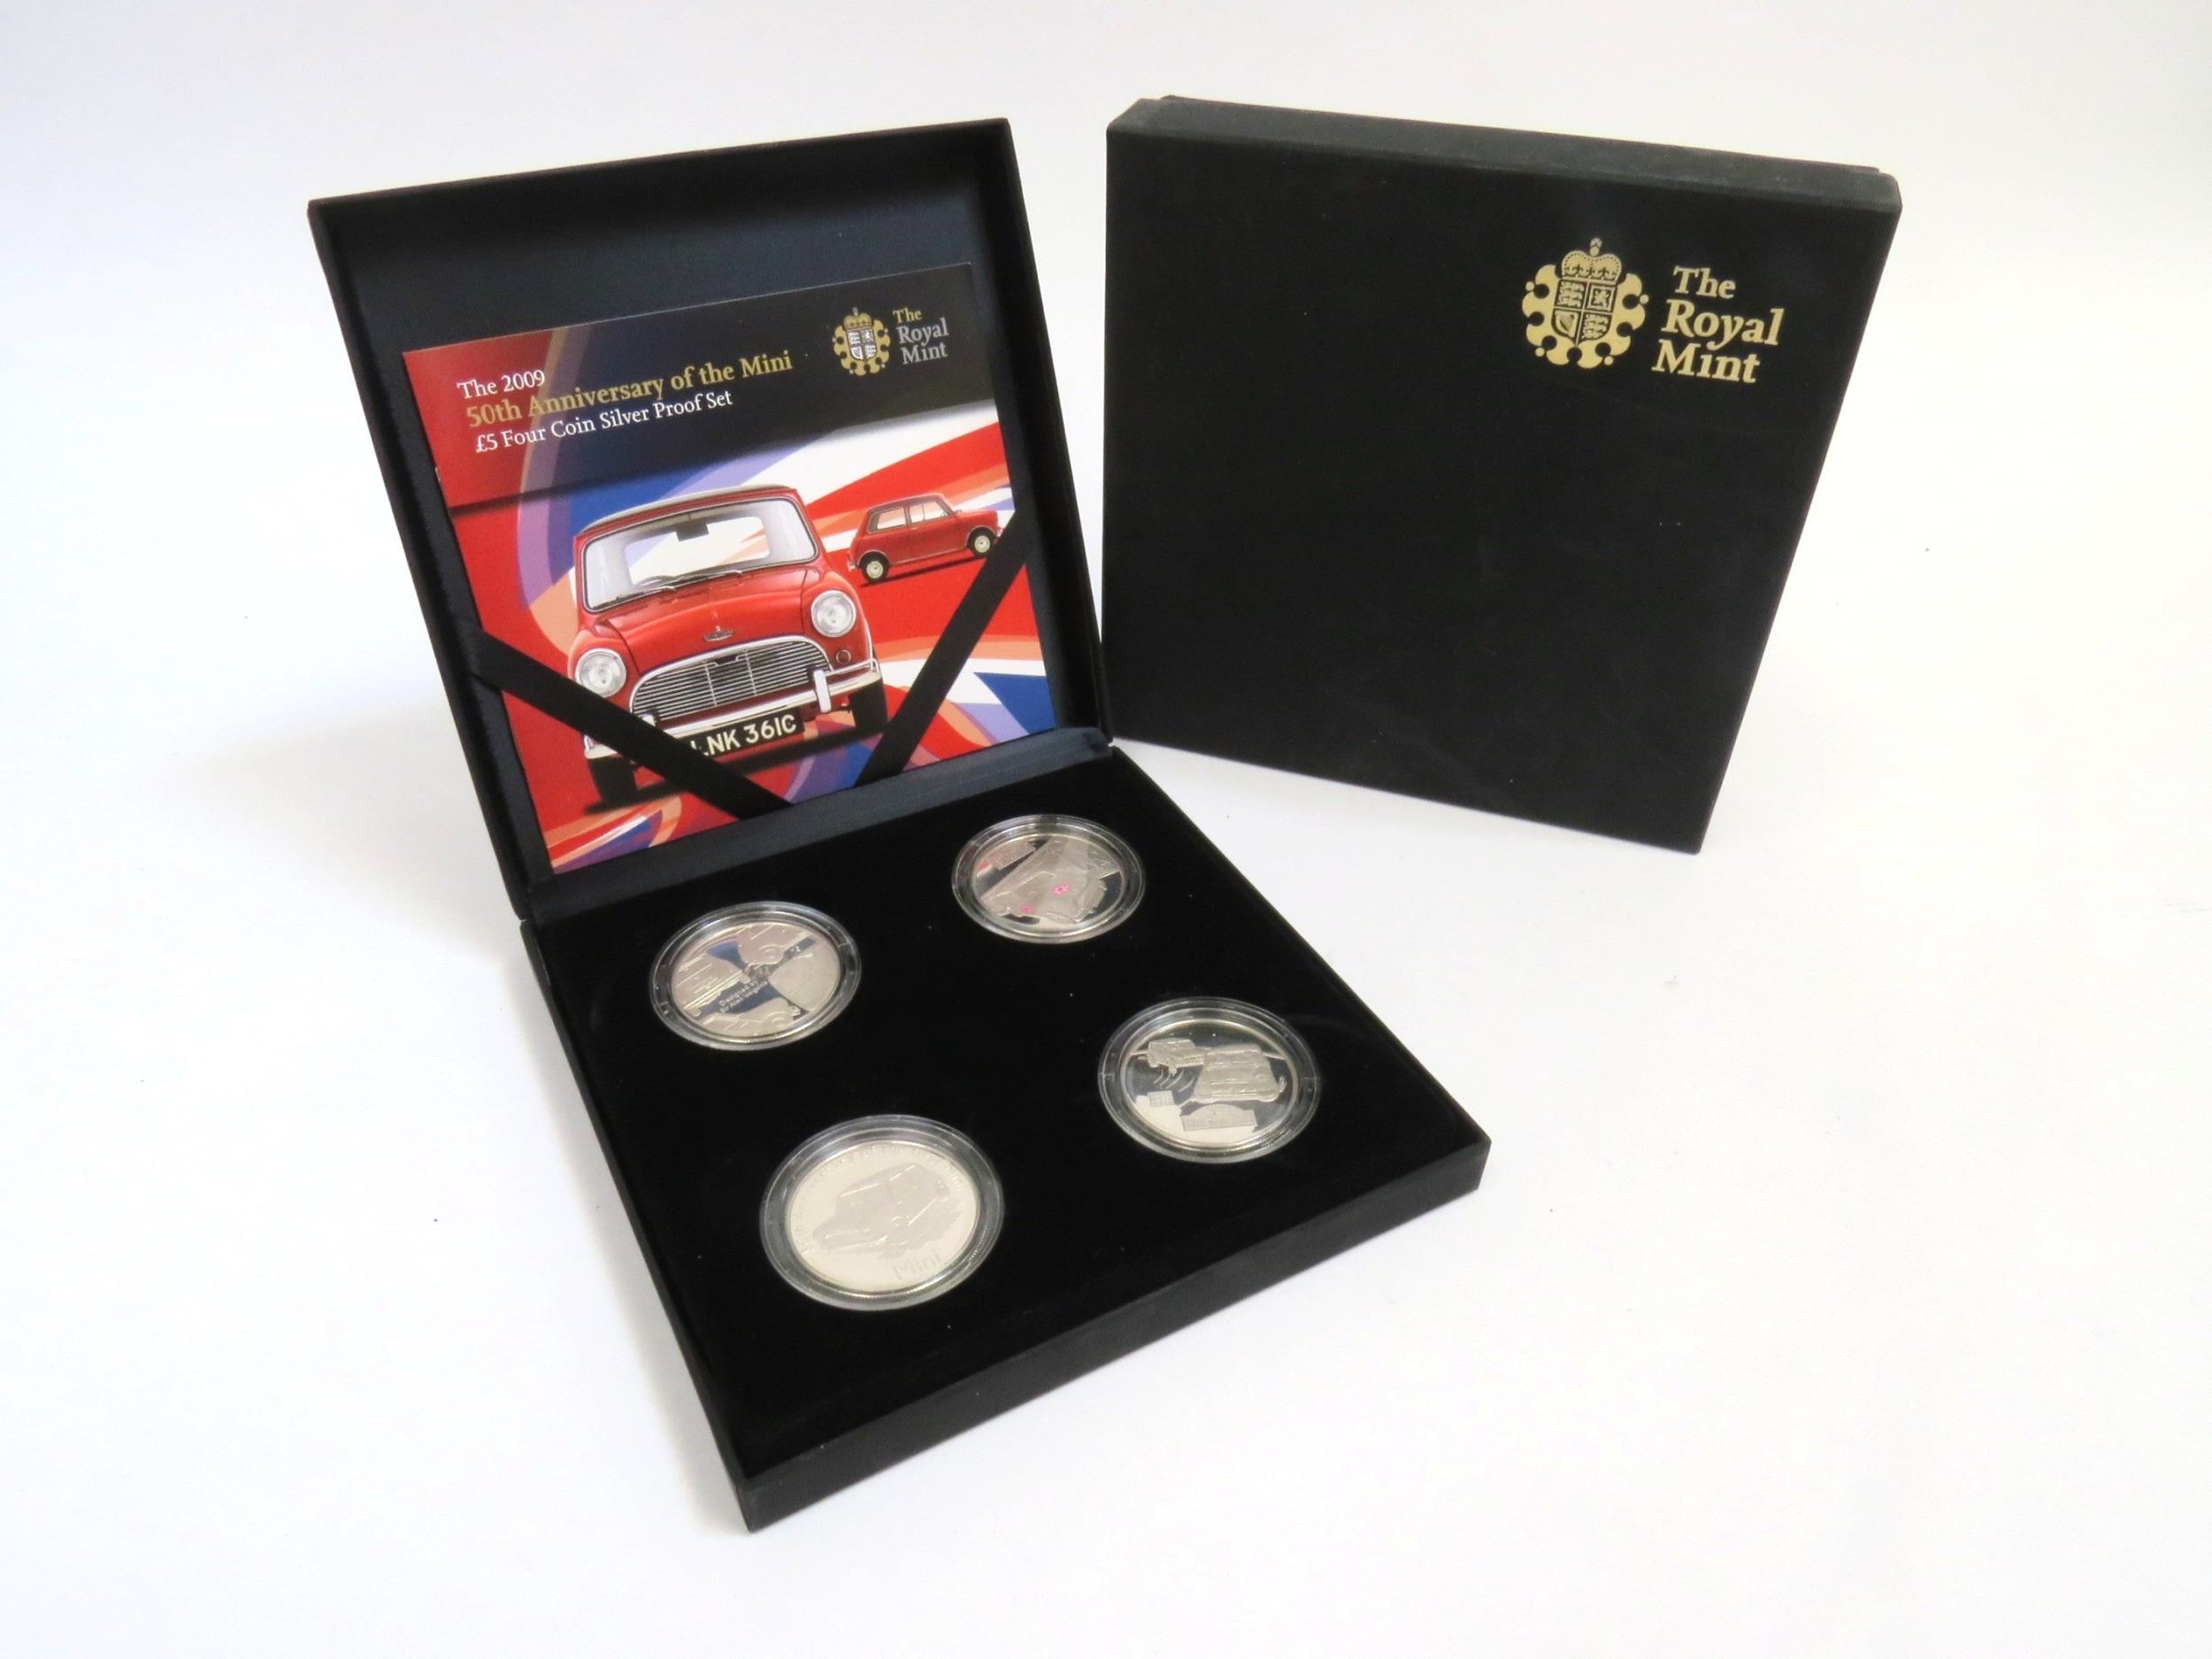 A Royal Mint 2009 50th Anniversary of the Mini £5 four coin silver proof set with certificate and